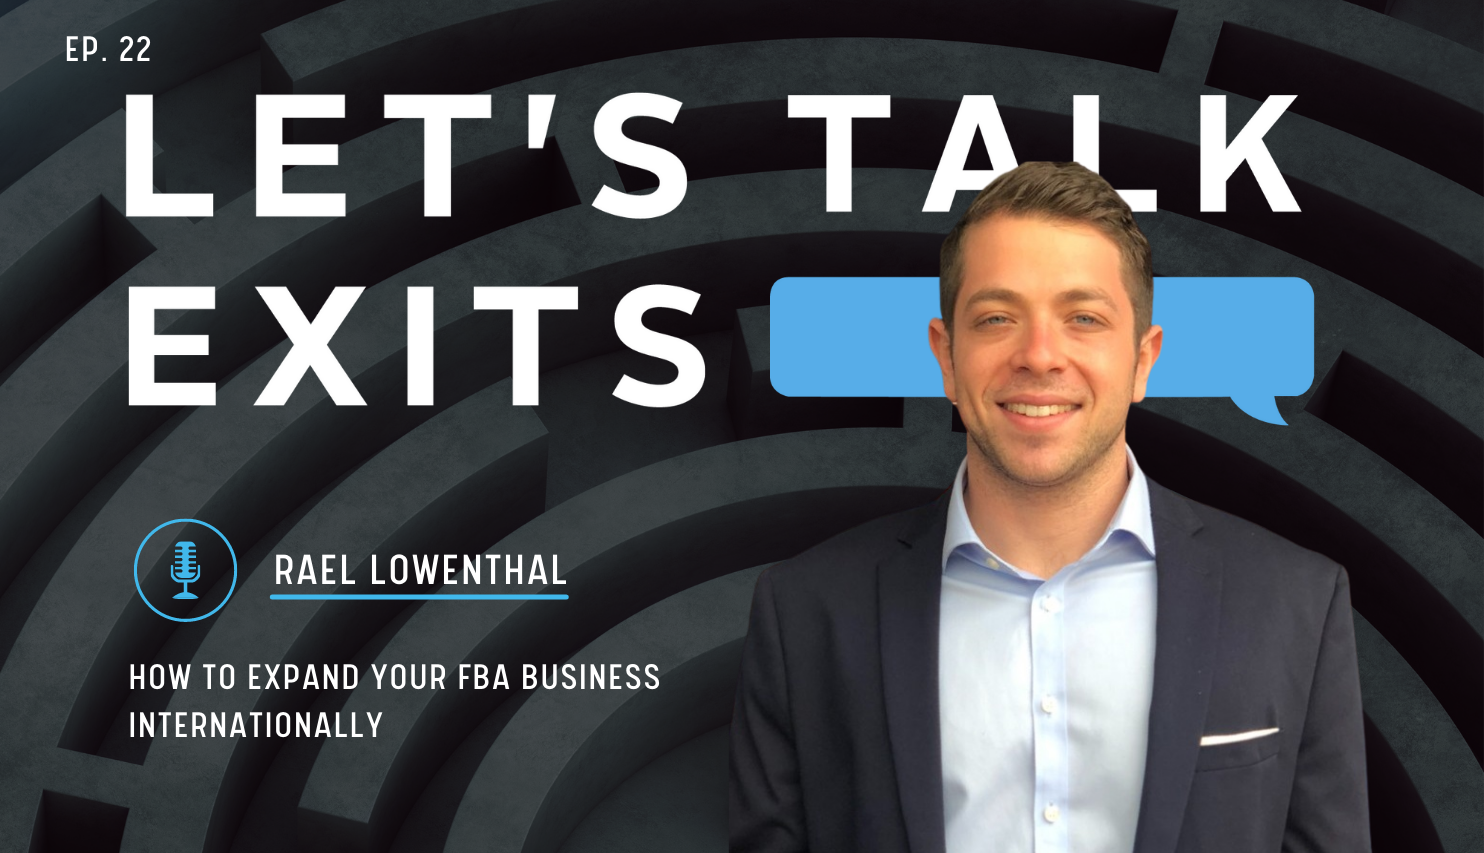 How to Expand Your FBA Business Internationally with Rael Lowenthal